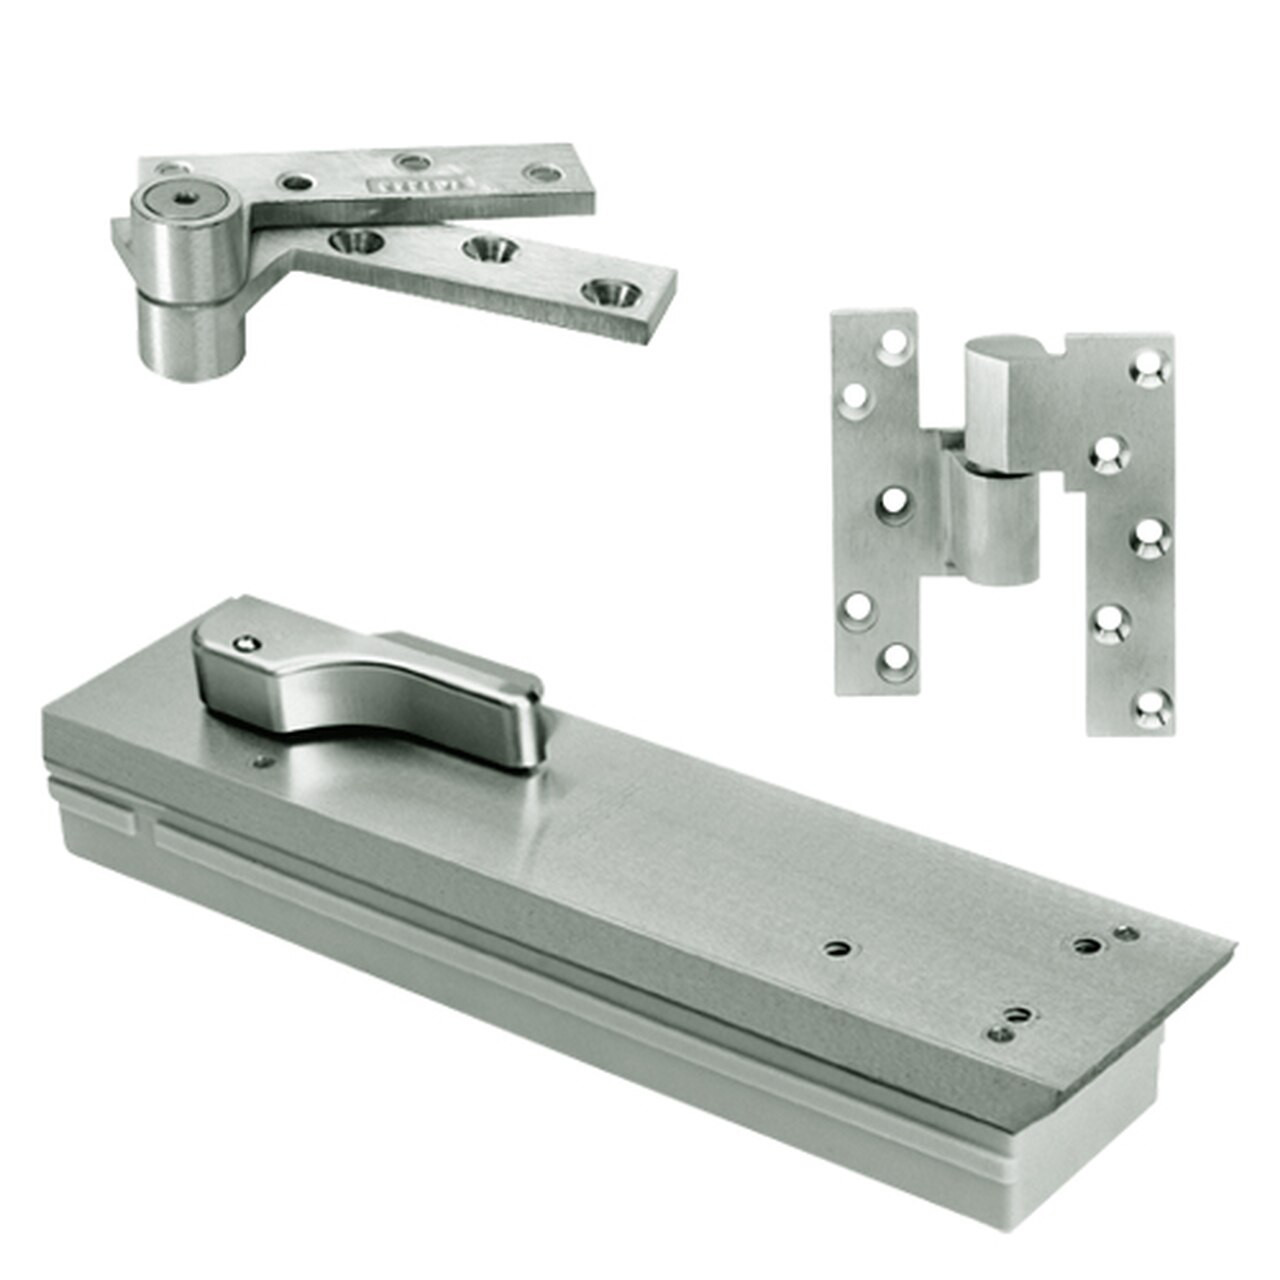 FQ5104NBC-LFP-LCC-RH-619 Rixson Q51 Series Fire Rated 3/4" Offset Hung Shallow Depth Floor Closers in Satin Nickel Finish